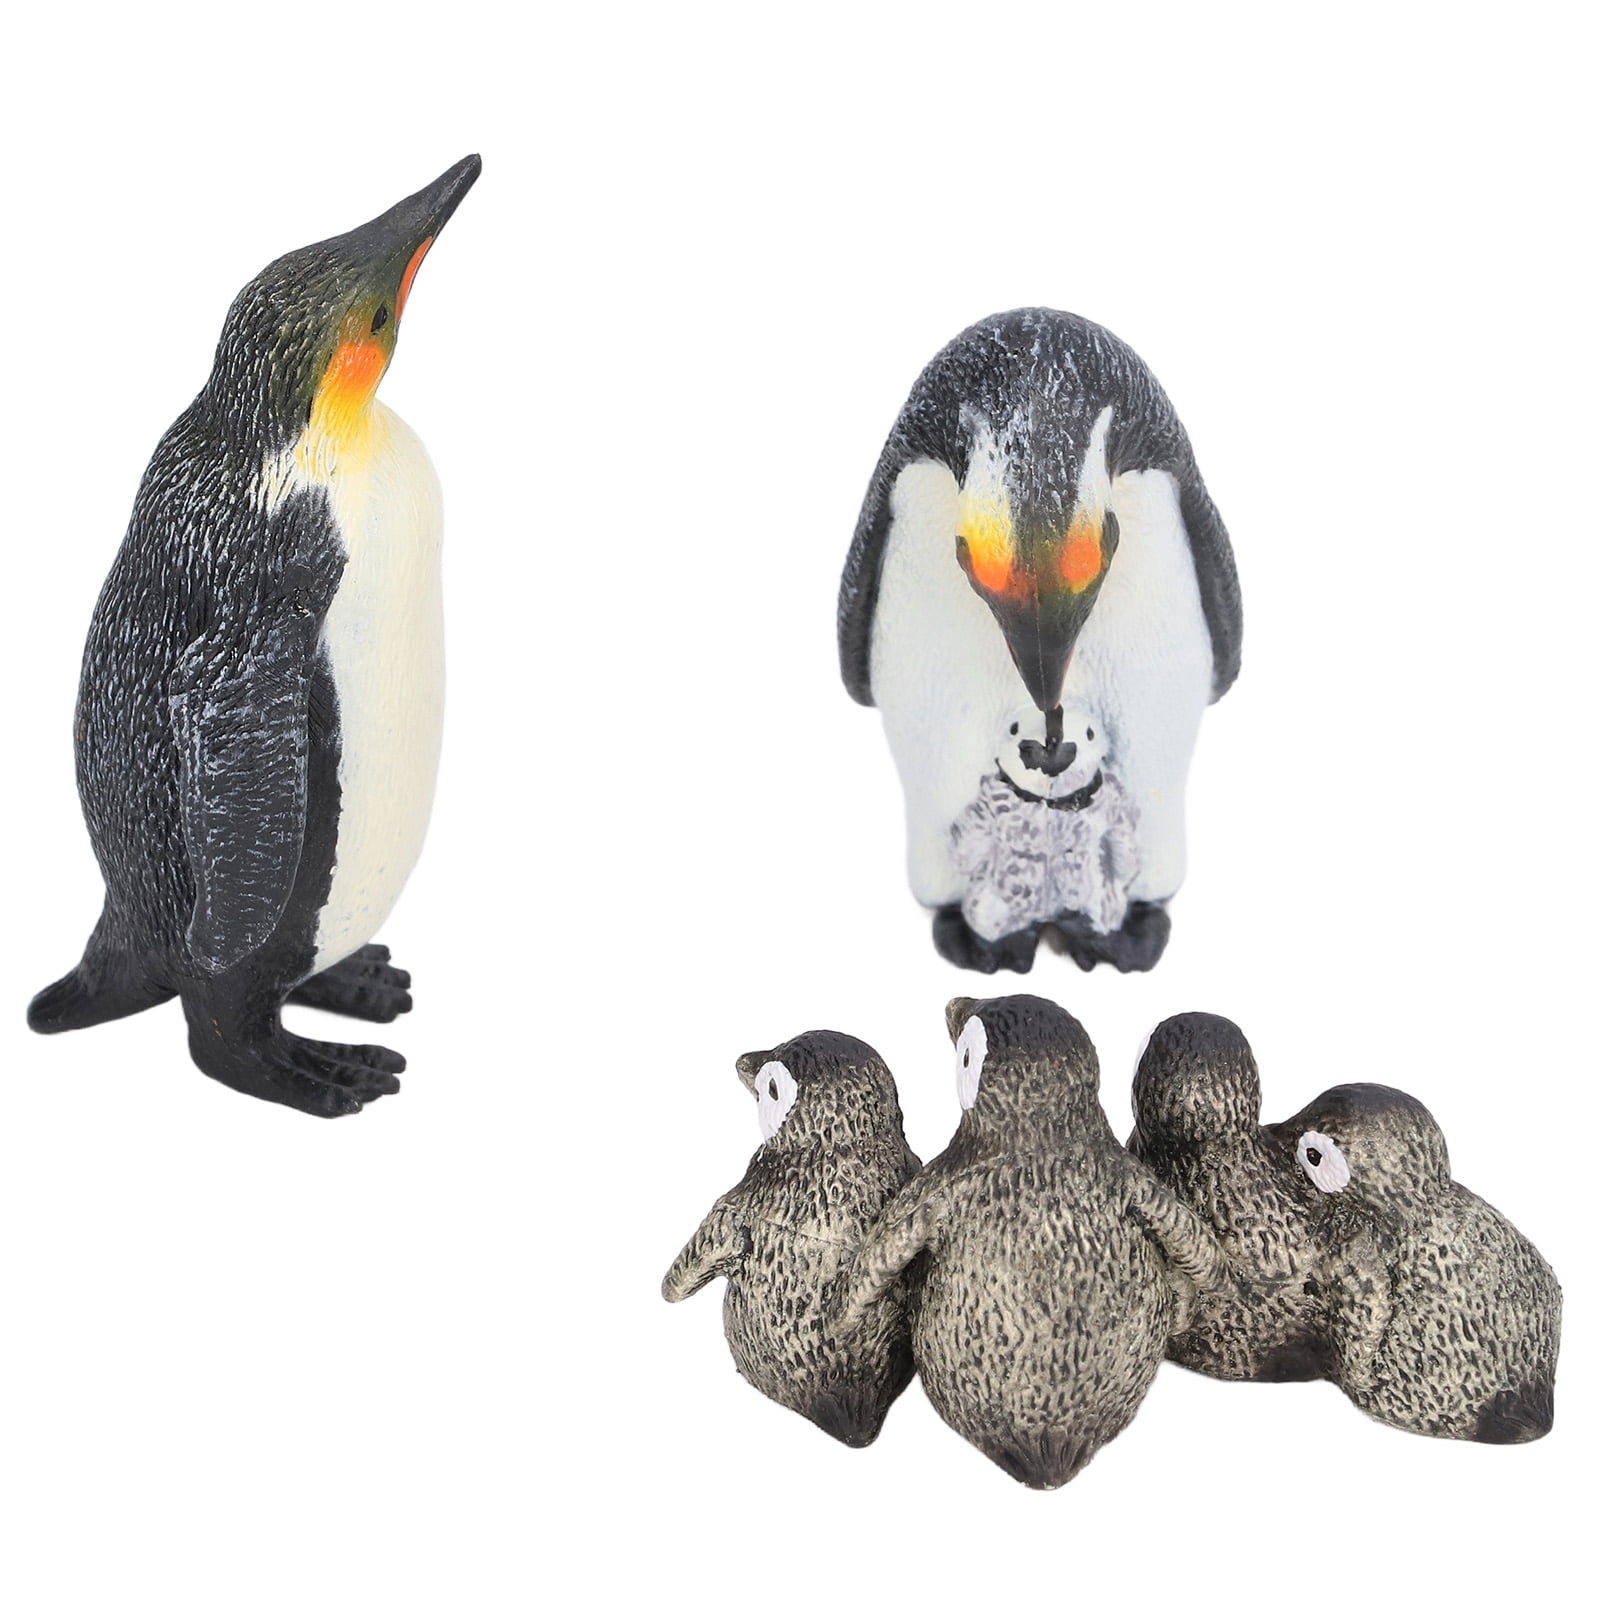 Ccdes 3Pcs Model Vinyl Material Safe Odorless Vivid Real Tiny Animal  Figures For Above 3 Years Old,Animal Model,Tiny Animals Figures | Walmart  Canada